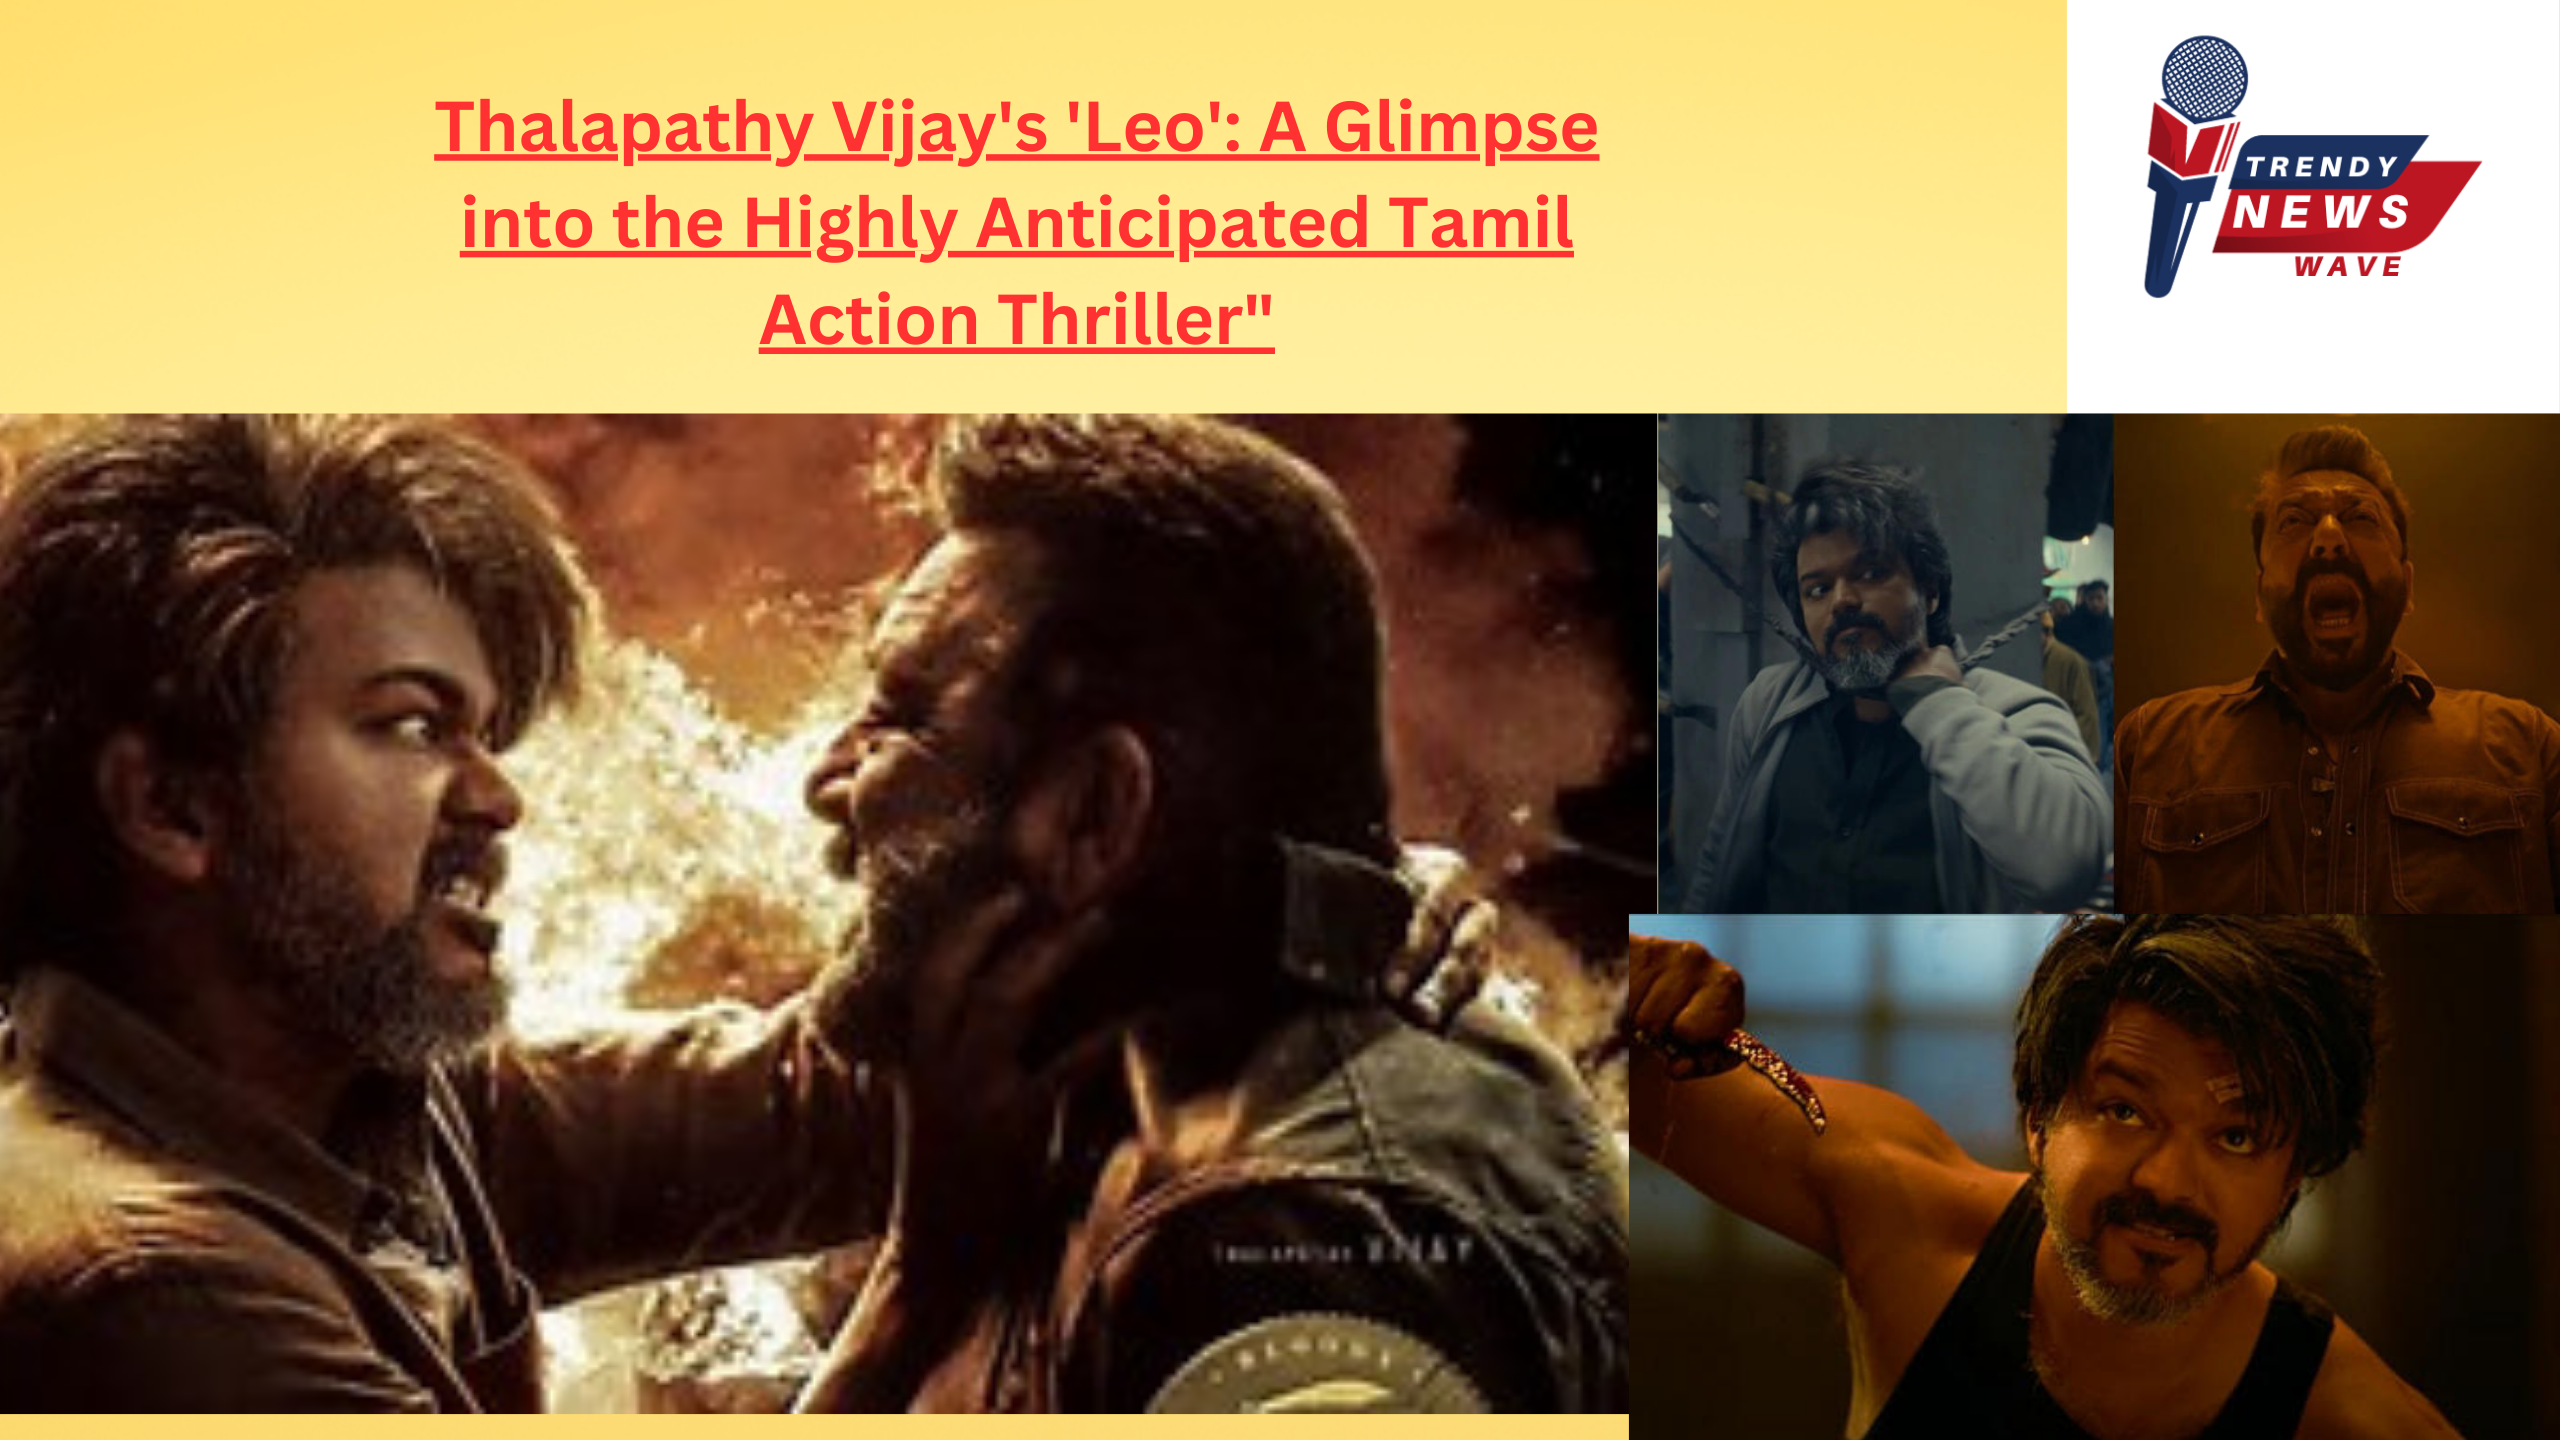 Thalapathy Vijay's 'Leo': A Glimpse into the Highly Anticipated Tamil Action Thriller